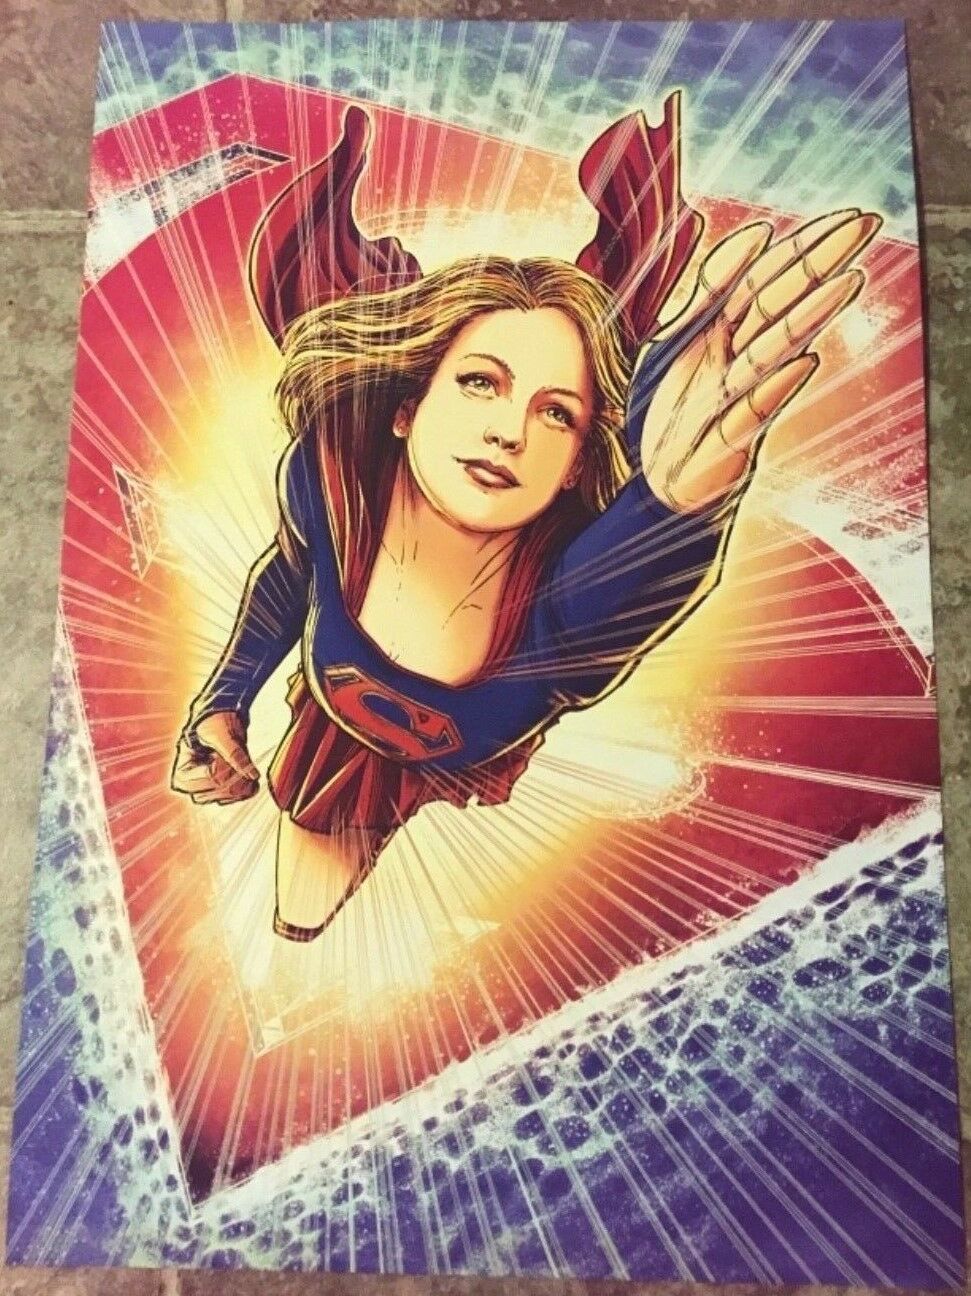 Supergirl Cw 13 X 19 Poster 2017 Nycc Dc Wb Amulet Books New York Comic Con Rare